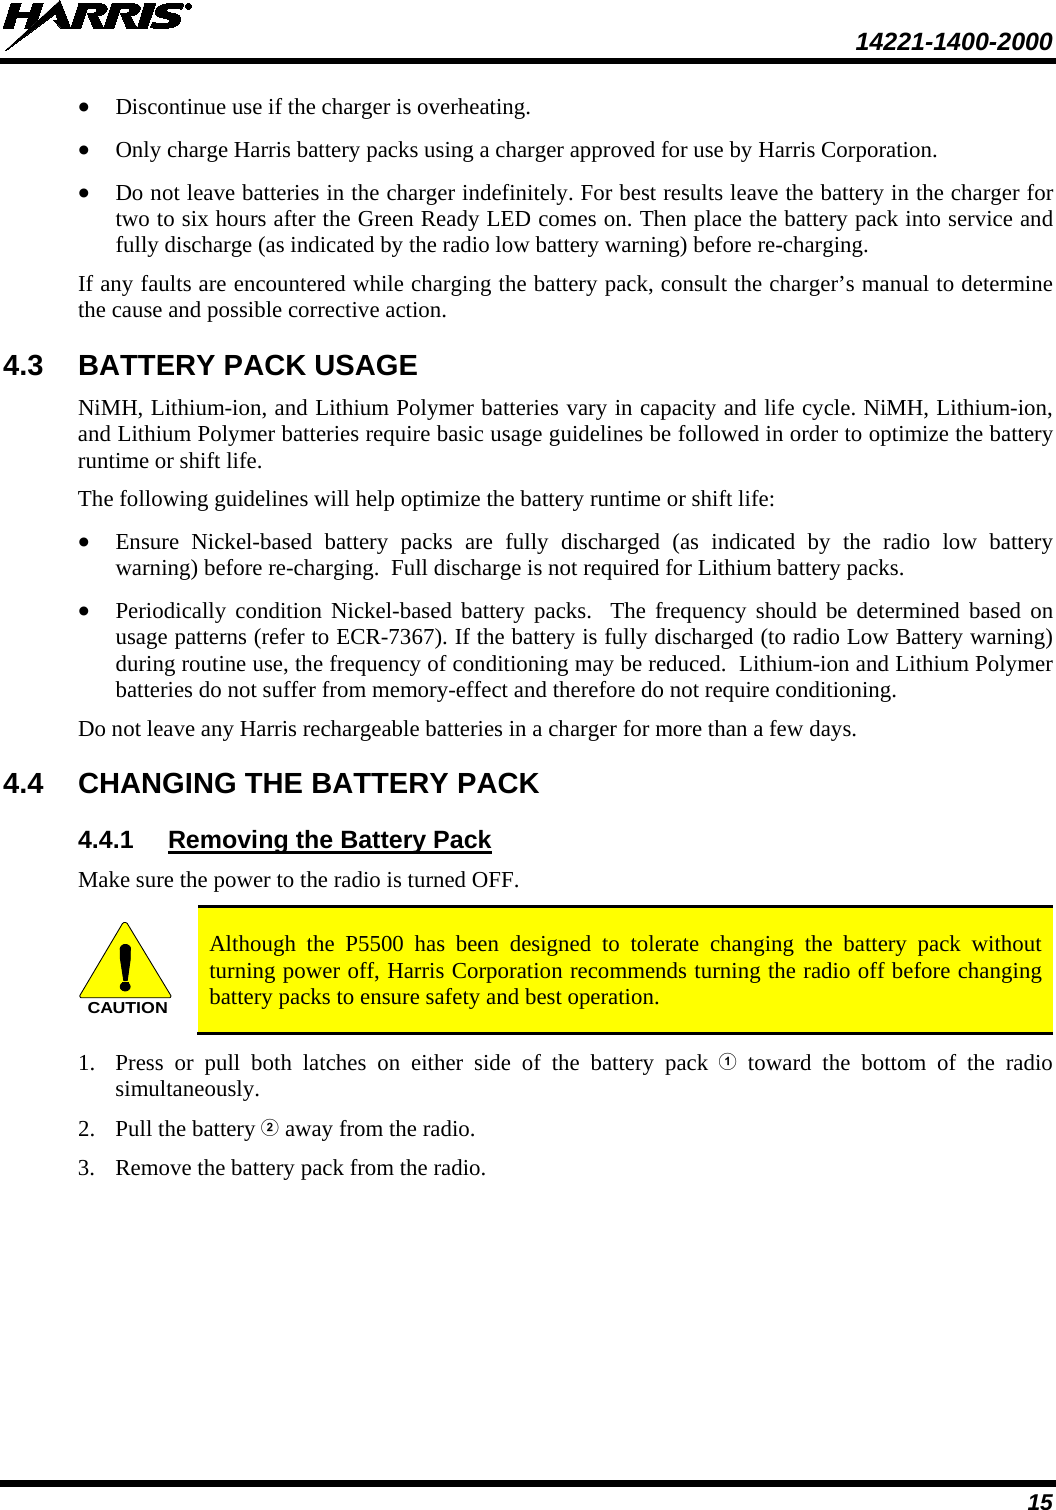  14221-1400-2000  15 • Discontinue use if the charger is overheating. • Only charge Harris battery packs using a charger approved for use by Harris Corporation. • Do not leave batteries in the charger indefinitely. For best results leave the battery in the charger for two to six hours after the Green Ready LED comes on. Then place the battery pack into service and fully discharge (as indicated by the radio low battery warning) before re-charging. If any faults are encountered while charging the battery pack, consult the charger’s manual to determine the cause and possible corrective action. 4.3 BATTERY PACK USAGE NiMH, Lithium-ion, and Lithium Polymer batteries vary in capacity and life cycle. NiMH, Lithium-ion, and Lithium Polymer batteries require basic usage guidelines be followed in order to optimize the battery runtime or shift life. The following guidelines will help optimize the battery runtime or shift life: • Ensure Nickel-based battery packs are fully discharged (as indicated by the radio low battery warning) before re-charging.  Full discharge is not required for Lithium battery packs. • Periodically condition Nickel-based battery packs.  The frequency should be determined based on usage patterns (refer to ECR-7367). If the battery is fully discharged (to radio Low Battery warning) during routine use, the frequency of conditioning may be reduced.  Lithium-ion and Lithium Polymer batteries do not suffer from memory-effect and therefore do not require conditioning. Do not leave any Harris rechargeable batteries in a charger for more than a few days.  4.4 CHANGING THE BATTERY PACK 4.4.1 Make sure the power to the radio is turned OFF. Removing the Battery Pack CAUTION Although the P5500 has been designed to tolerate changing the battery pack without turning power off, Harris Corporation recommends turning the radio off before changing battery packs to ensure safety and best operation. 1. Press or pull both latches on either side of the battery pack  toward the bottom of the radio simultaneously.  2. Pull the battery  away from the radio. 3. Remove the battery pack from the radio.  